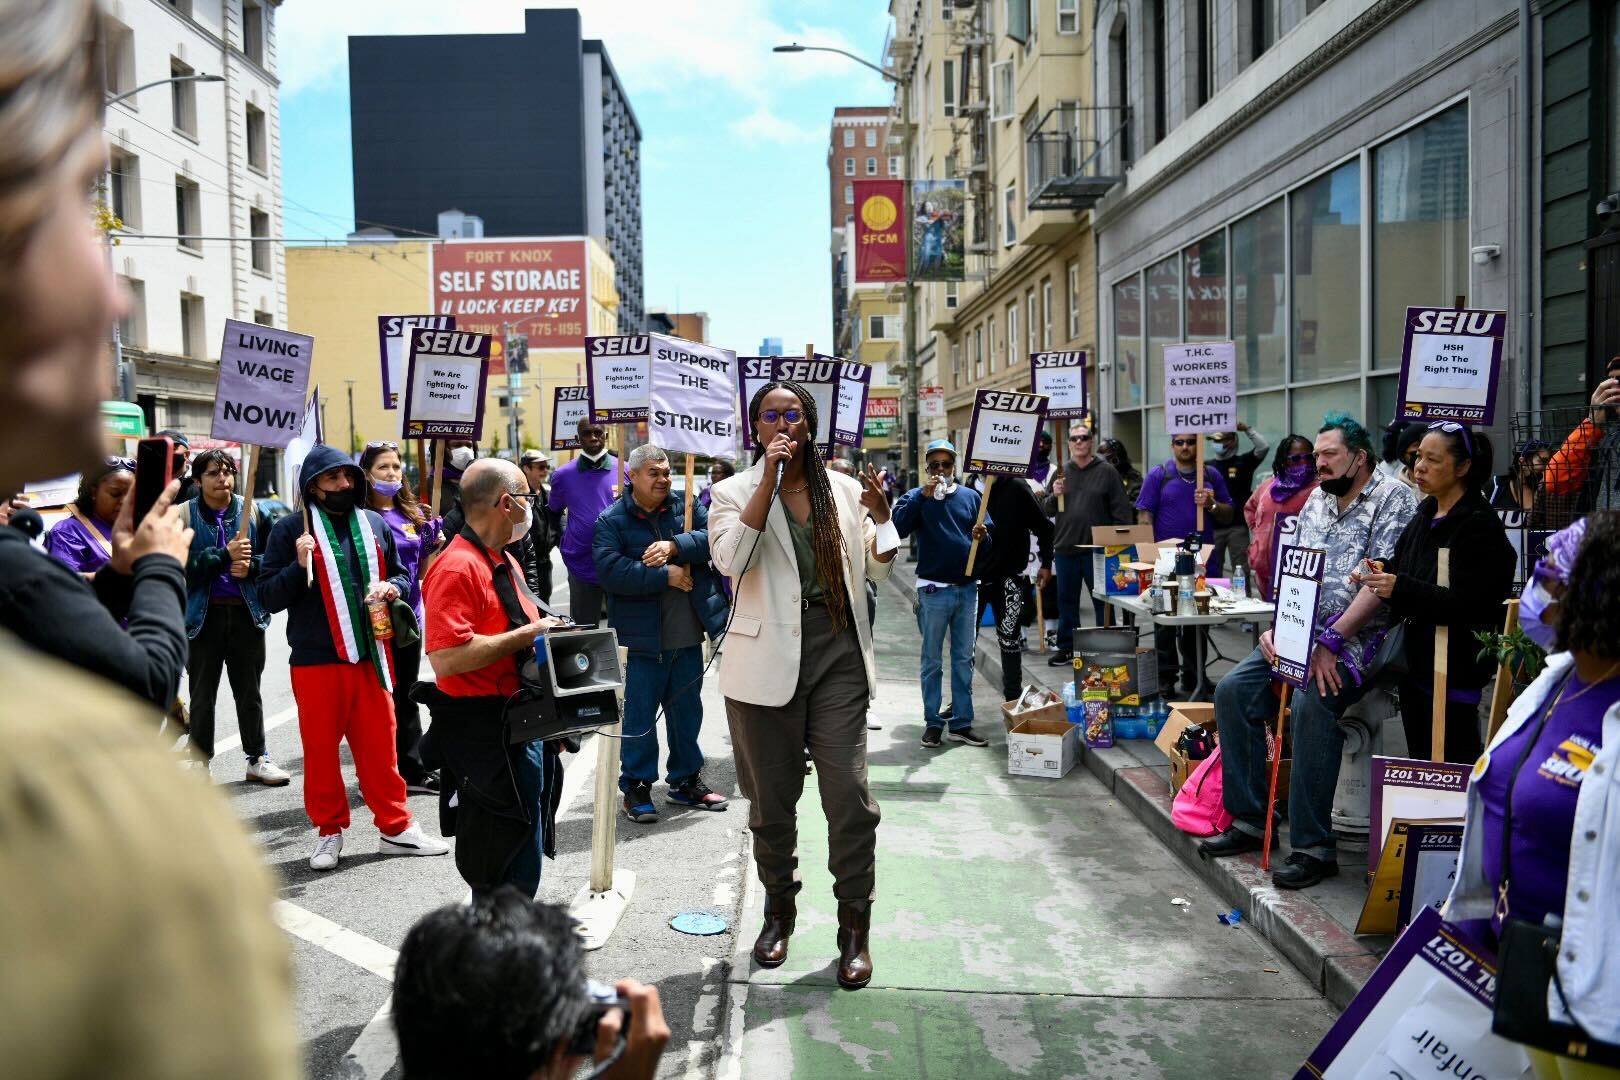 A woman speaking into a microphone stands on the street, surrounded by protesters holding signs.